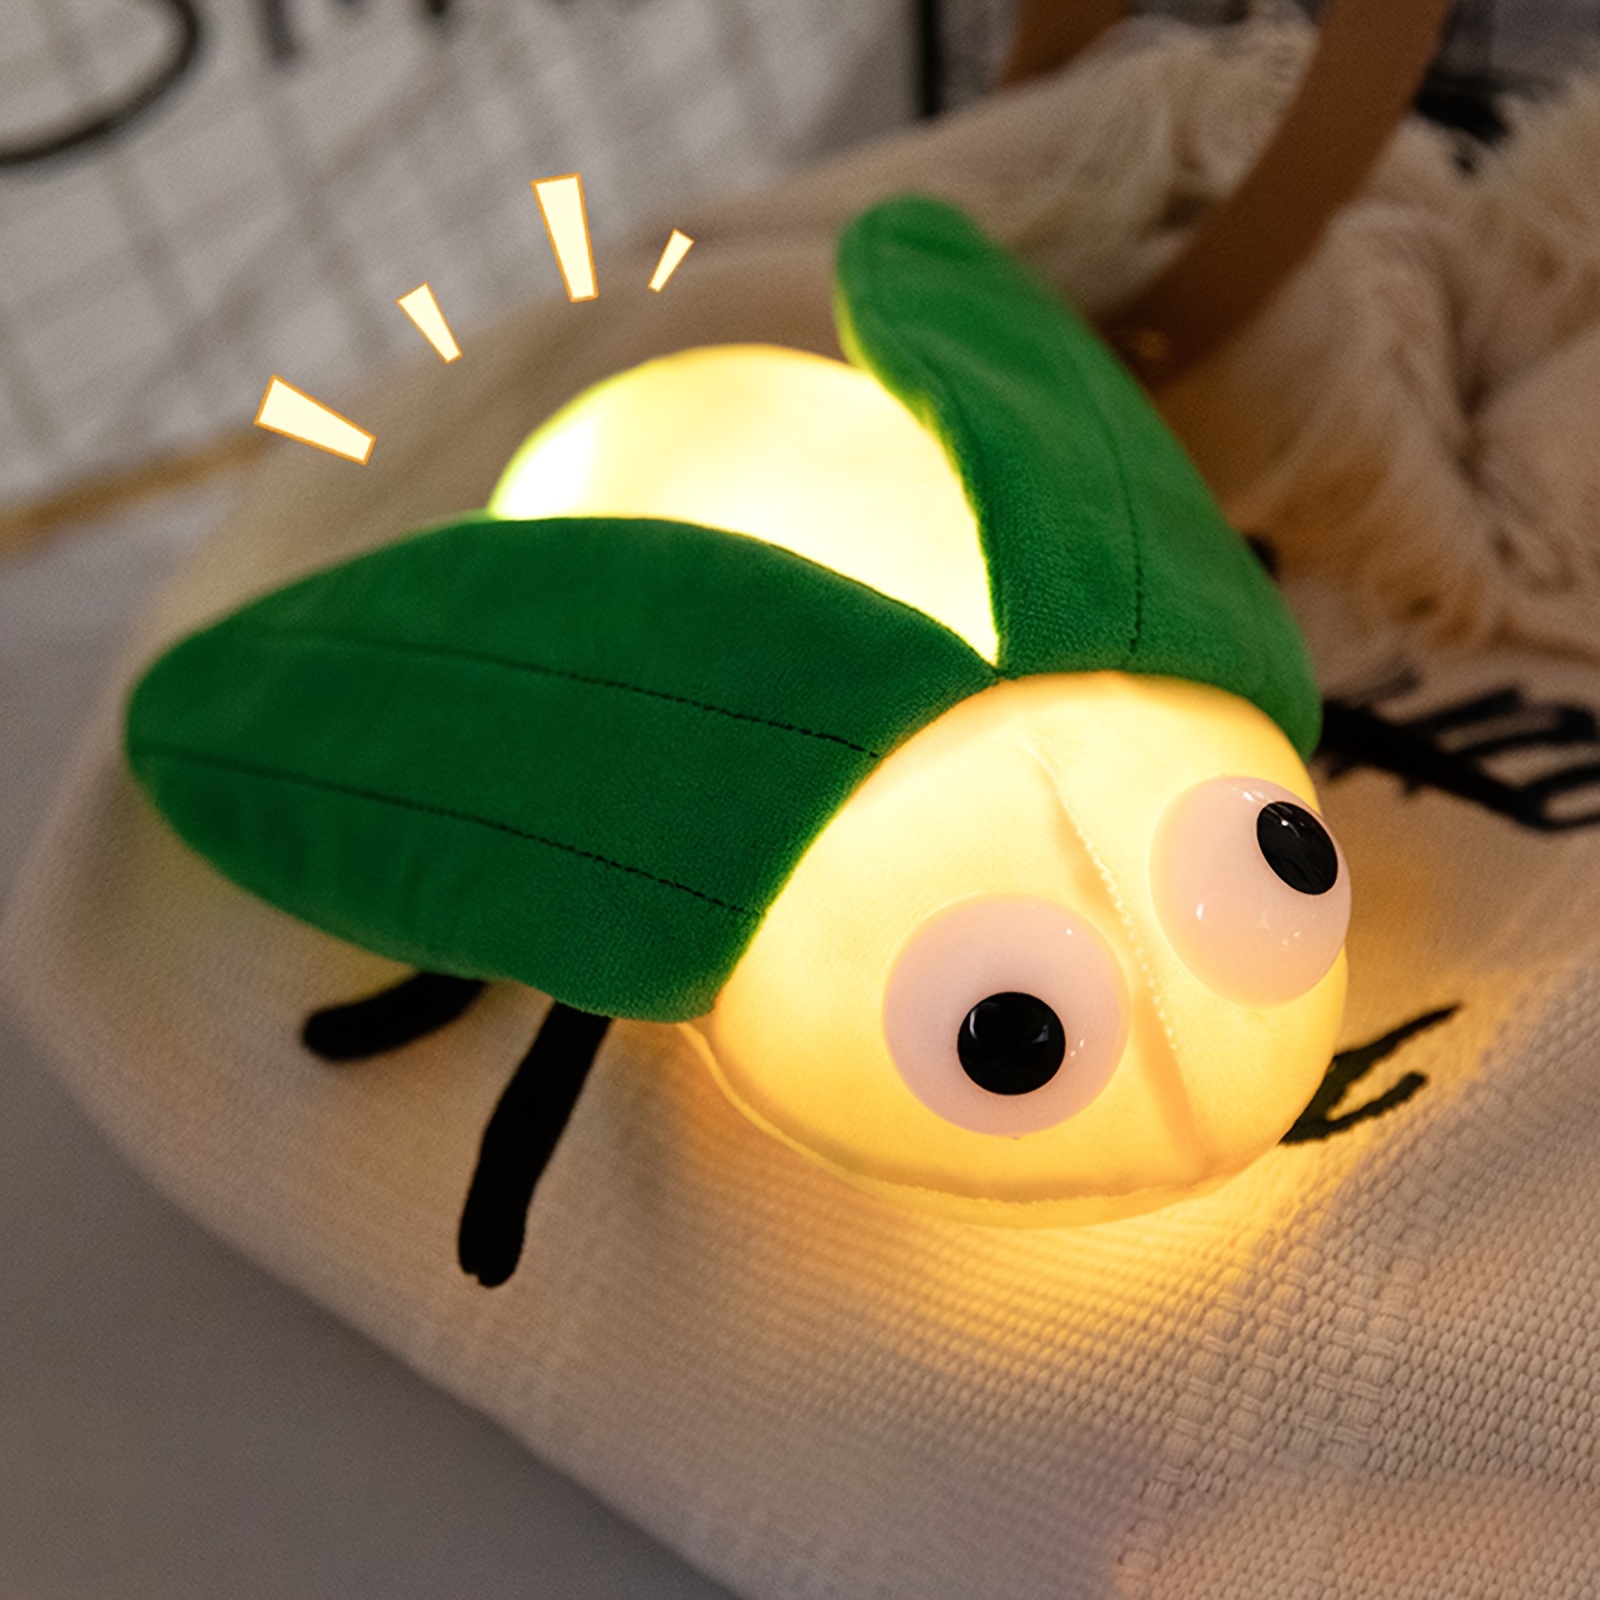 

Glow-in-the-dark Firefly Plush Toy - Soft And Cuddly Stuffed Animal With Led Lights, Perfect For Kids And Adults, Cozy Nightlight Companion, Fun And Unique Gift For Bedtime And Home Decor